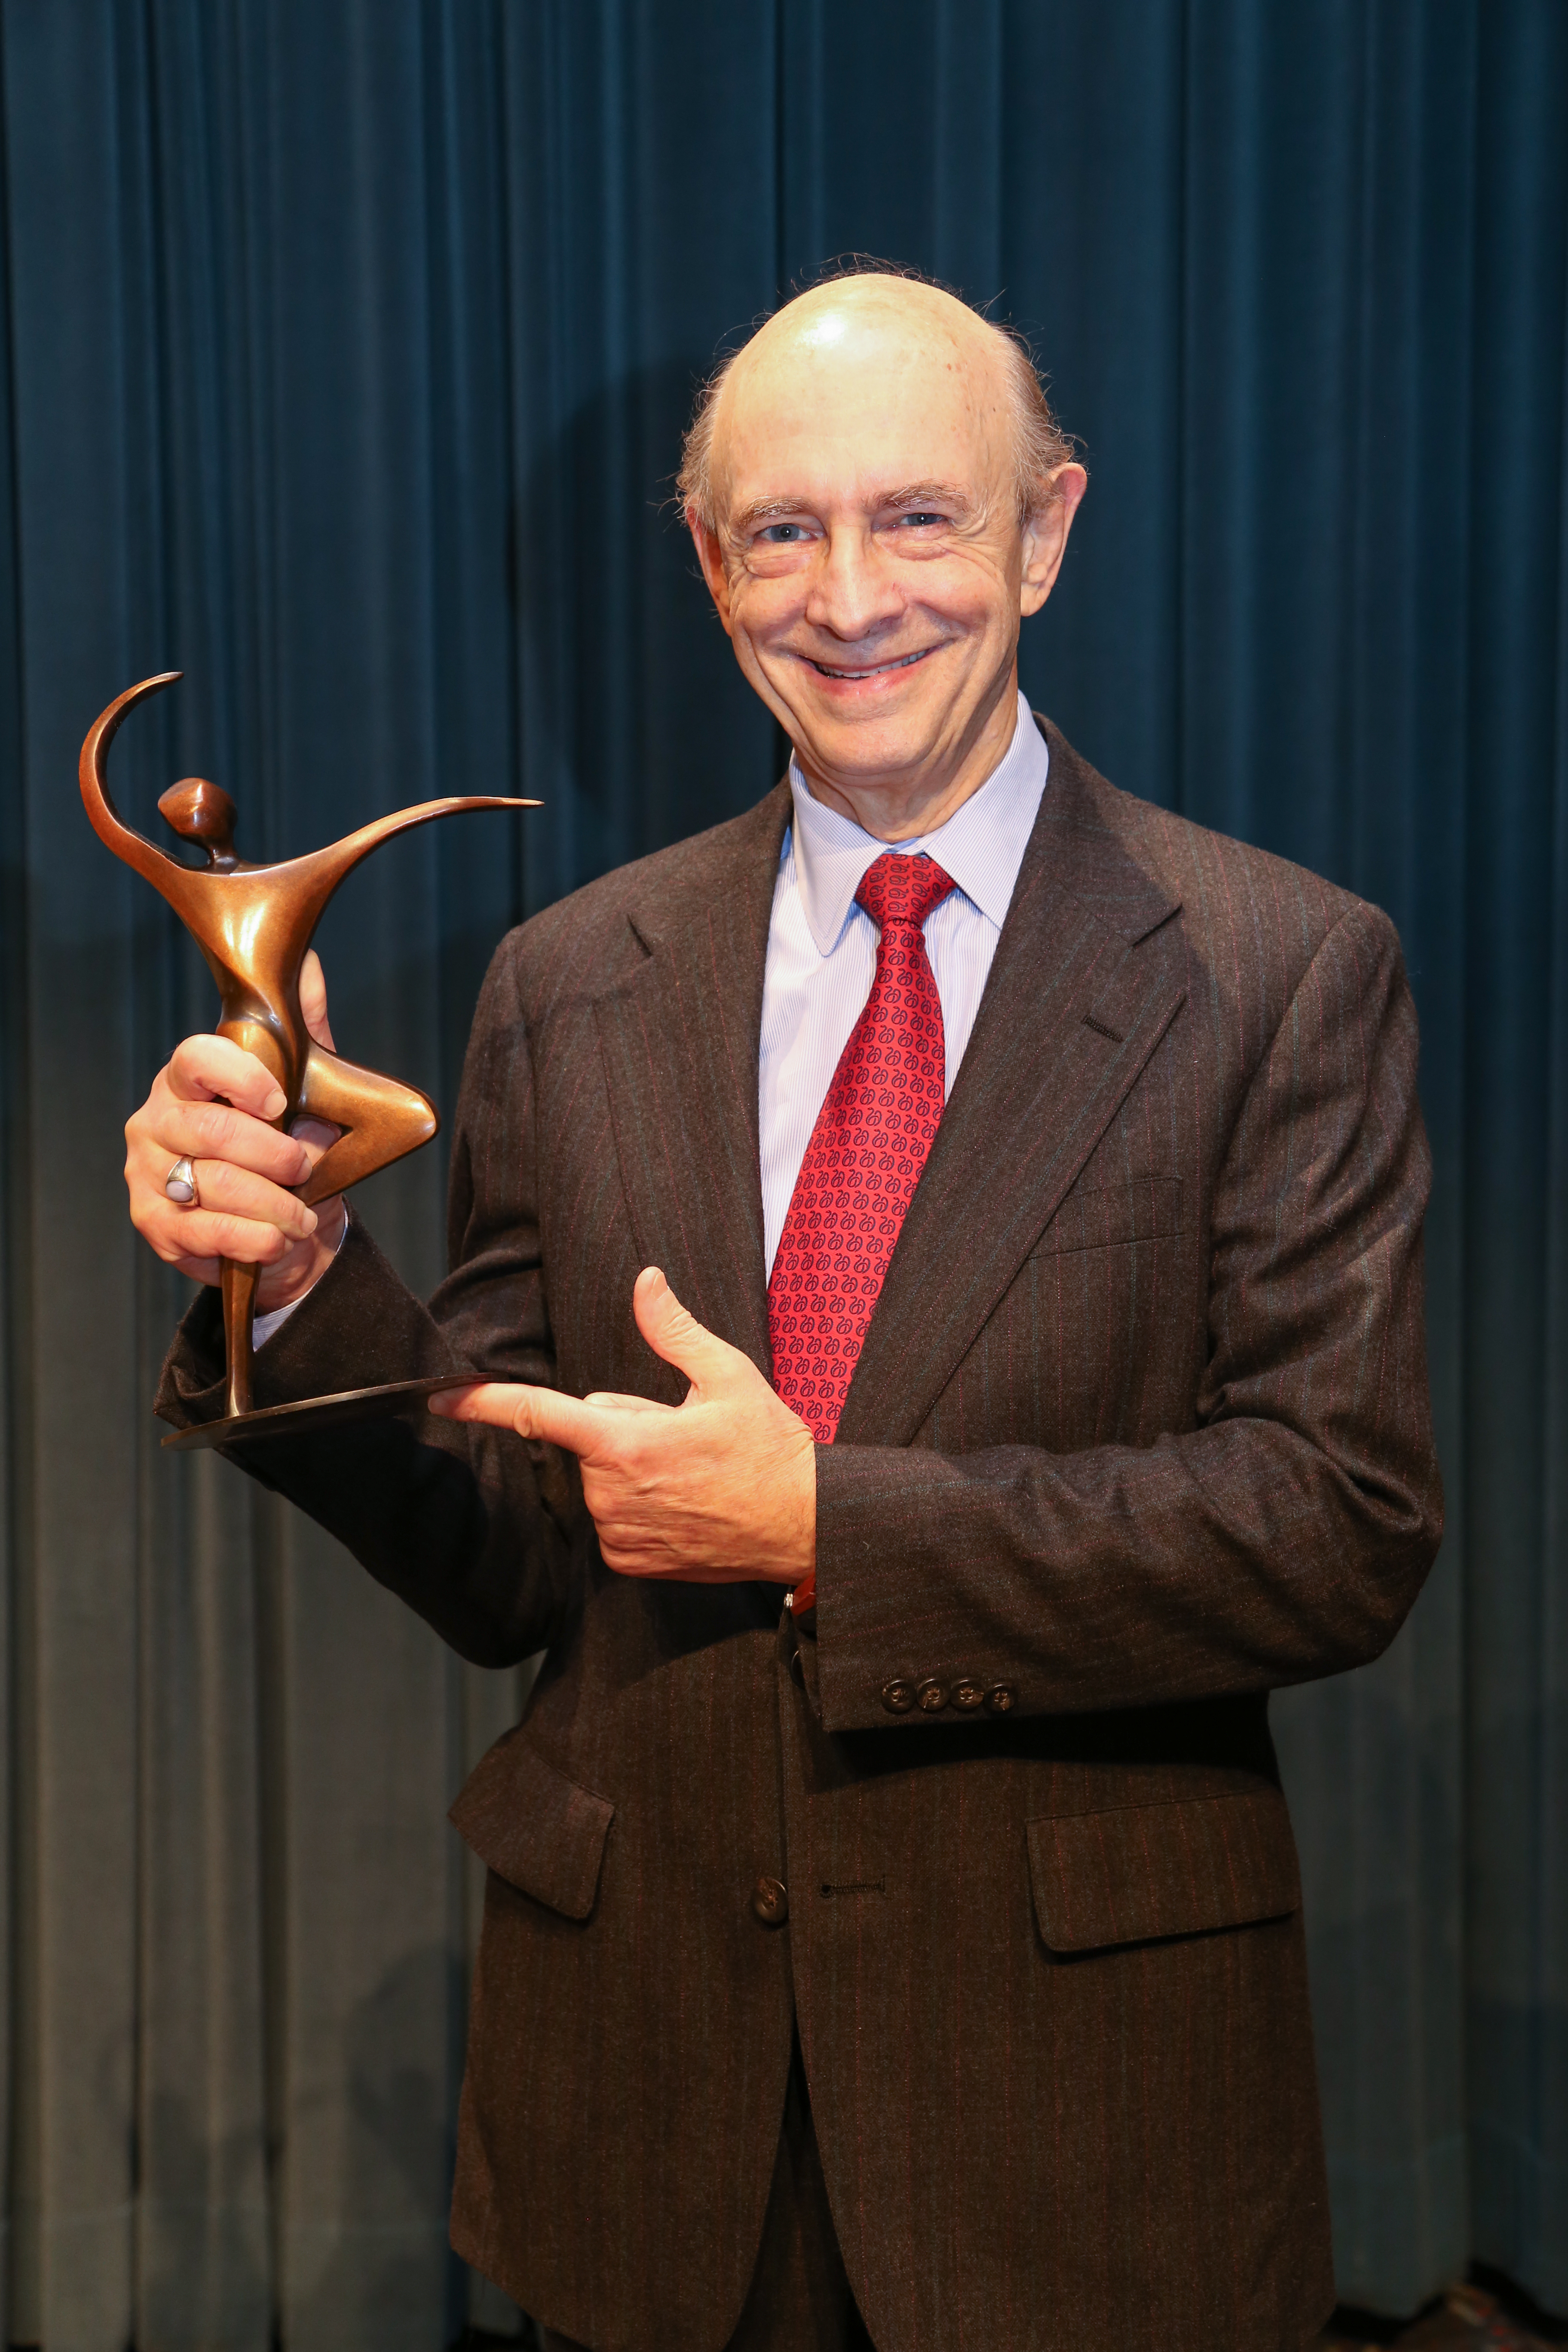 Dr. Harvey Alter poses with the Lasker Award in 2000.